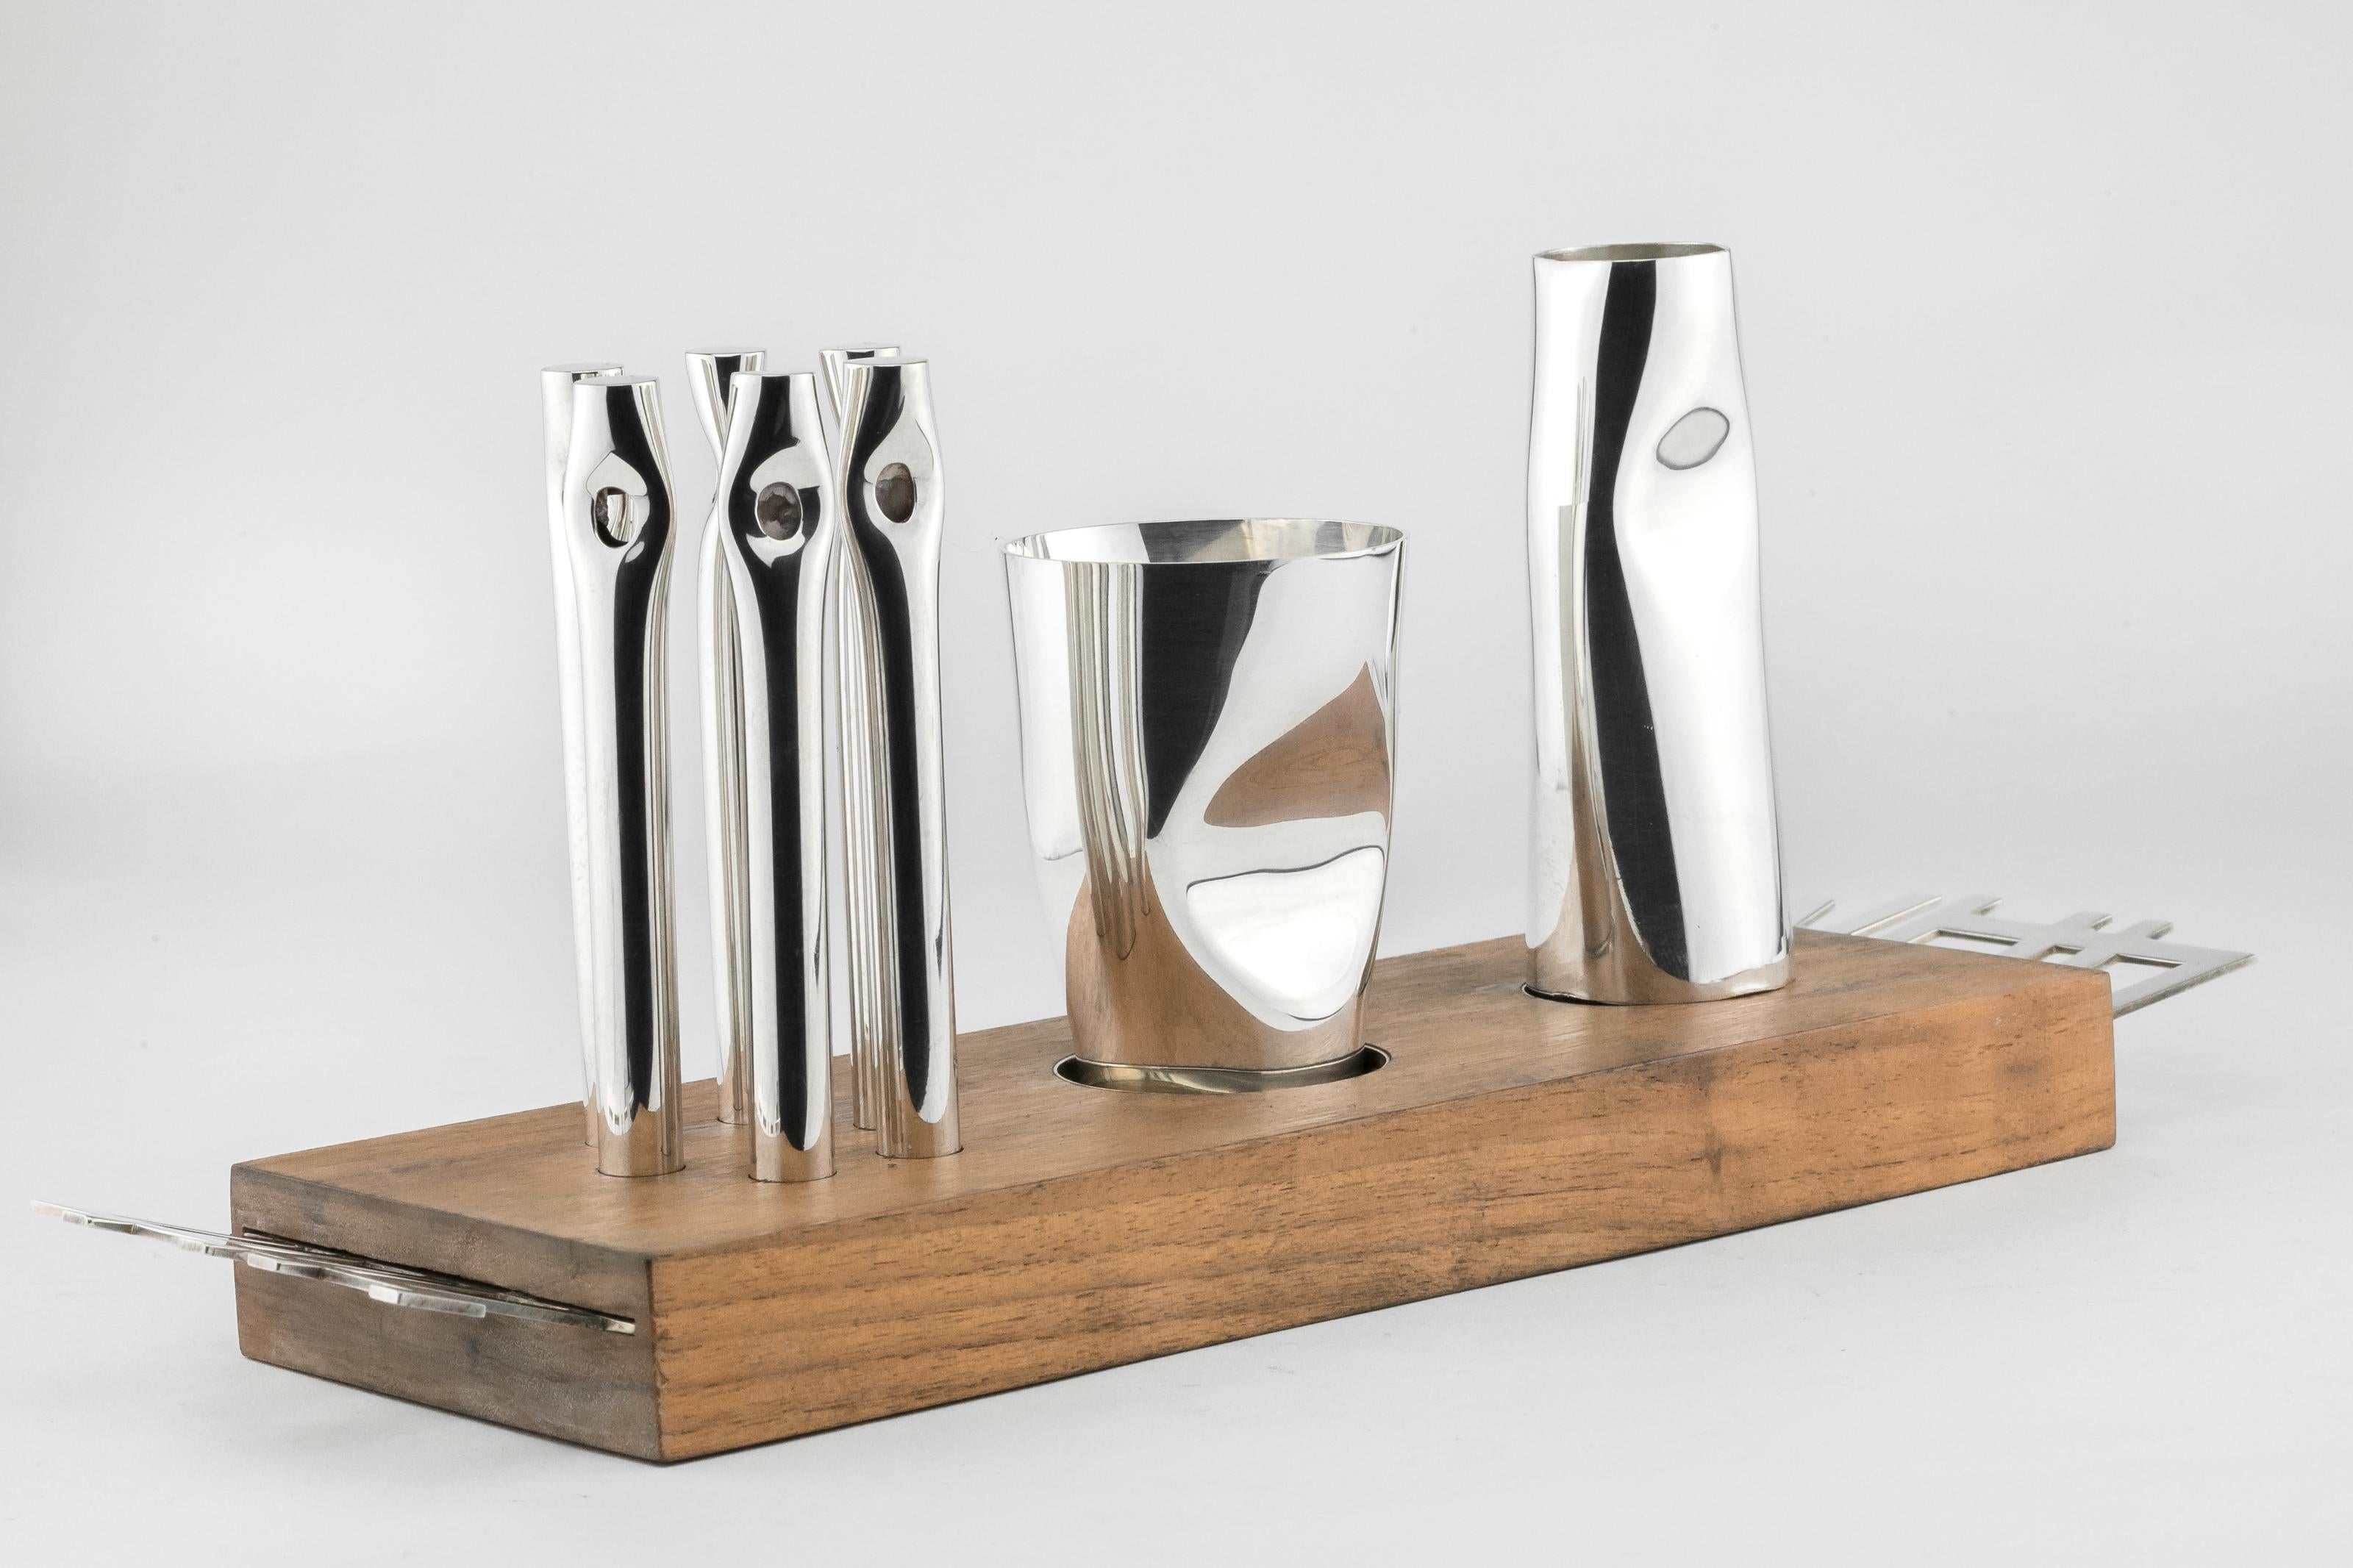 American sterling silver Havdalah set by Moshe Zabari, New York, 1968
Walnut base and hollow-formed, turned, pierced silver objects.
Moshe Zabari (born 1935, Jerusalem) is an Israeli artist known for his silver Judaica. He studied under Ludwig